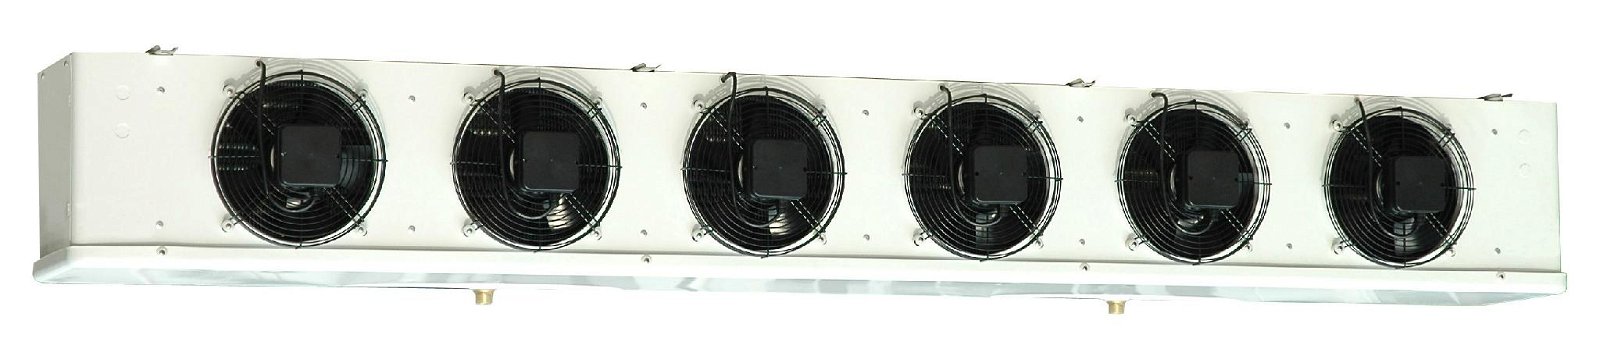 REA series forced convection air coolers